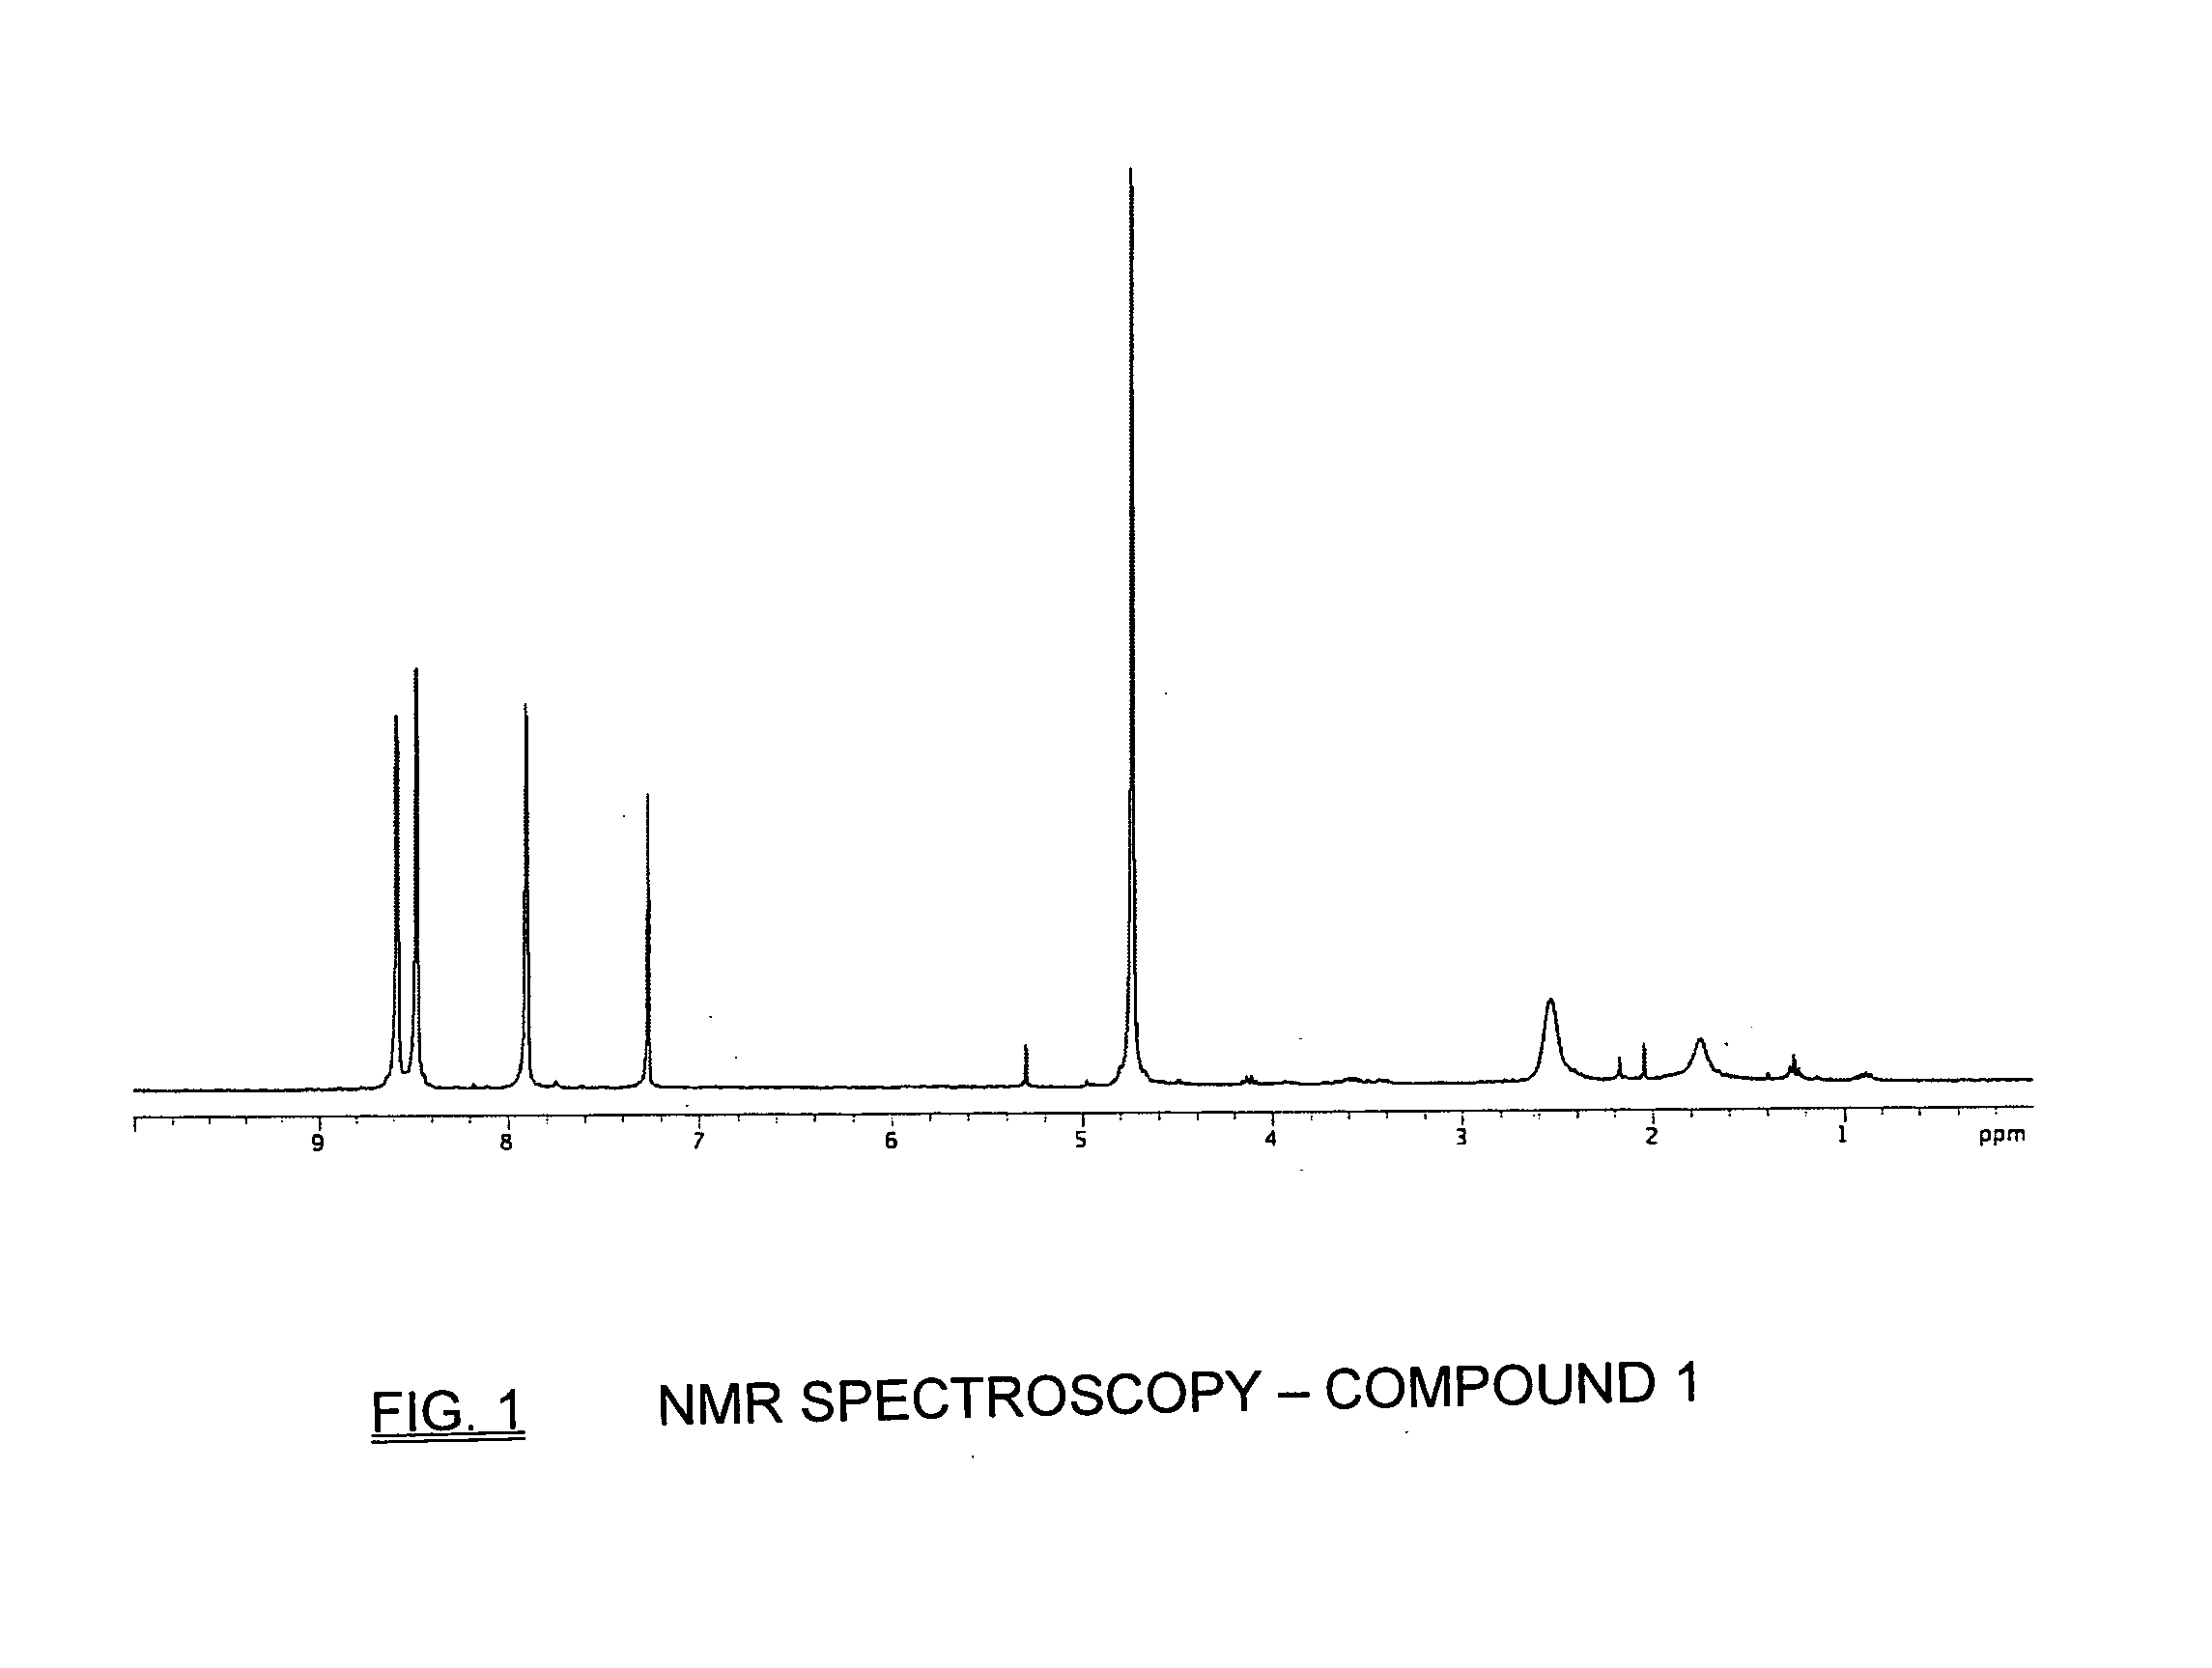 Optical device and method for non-invasive real-time testing of blood sugar levels